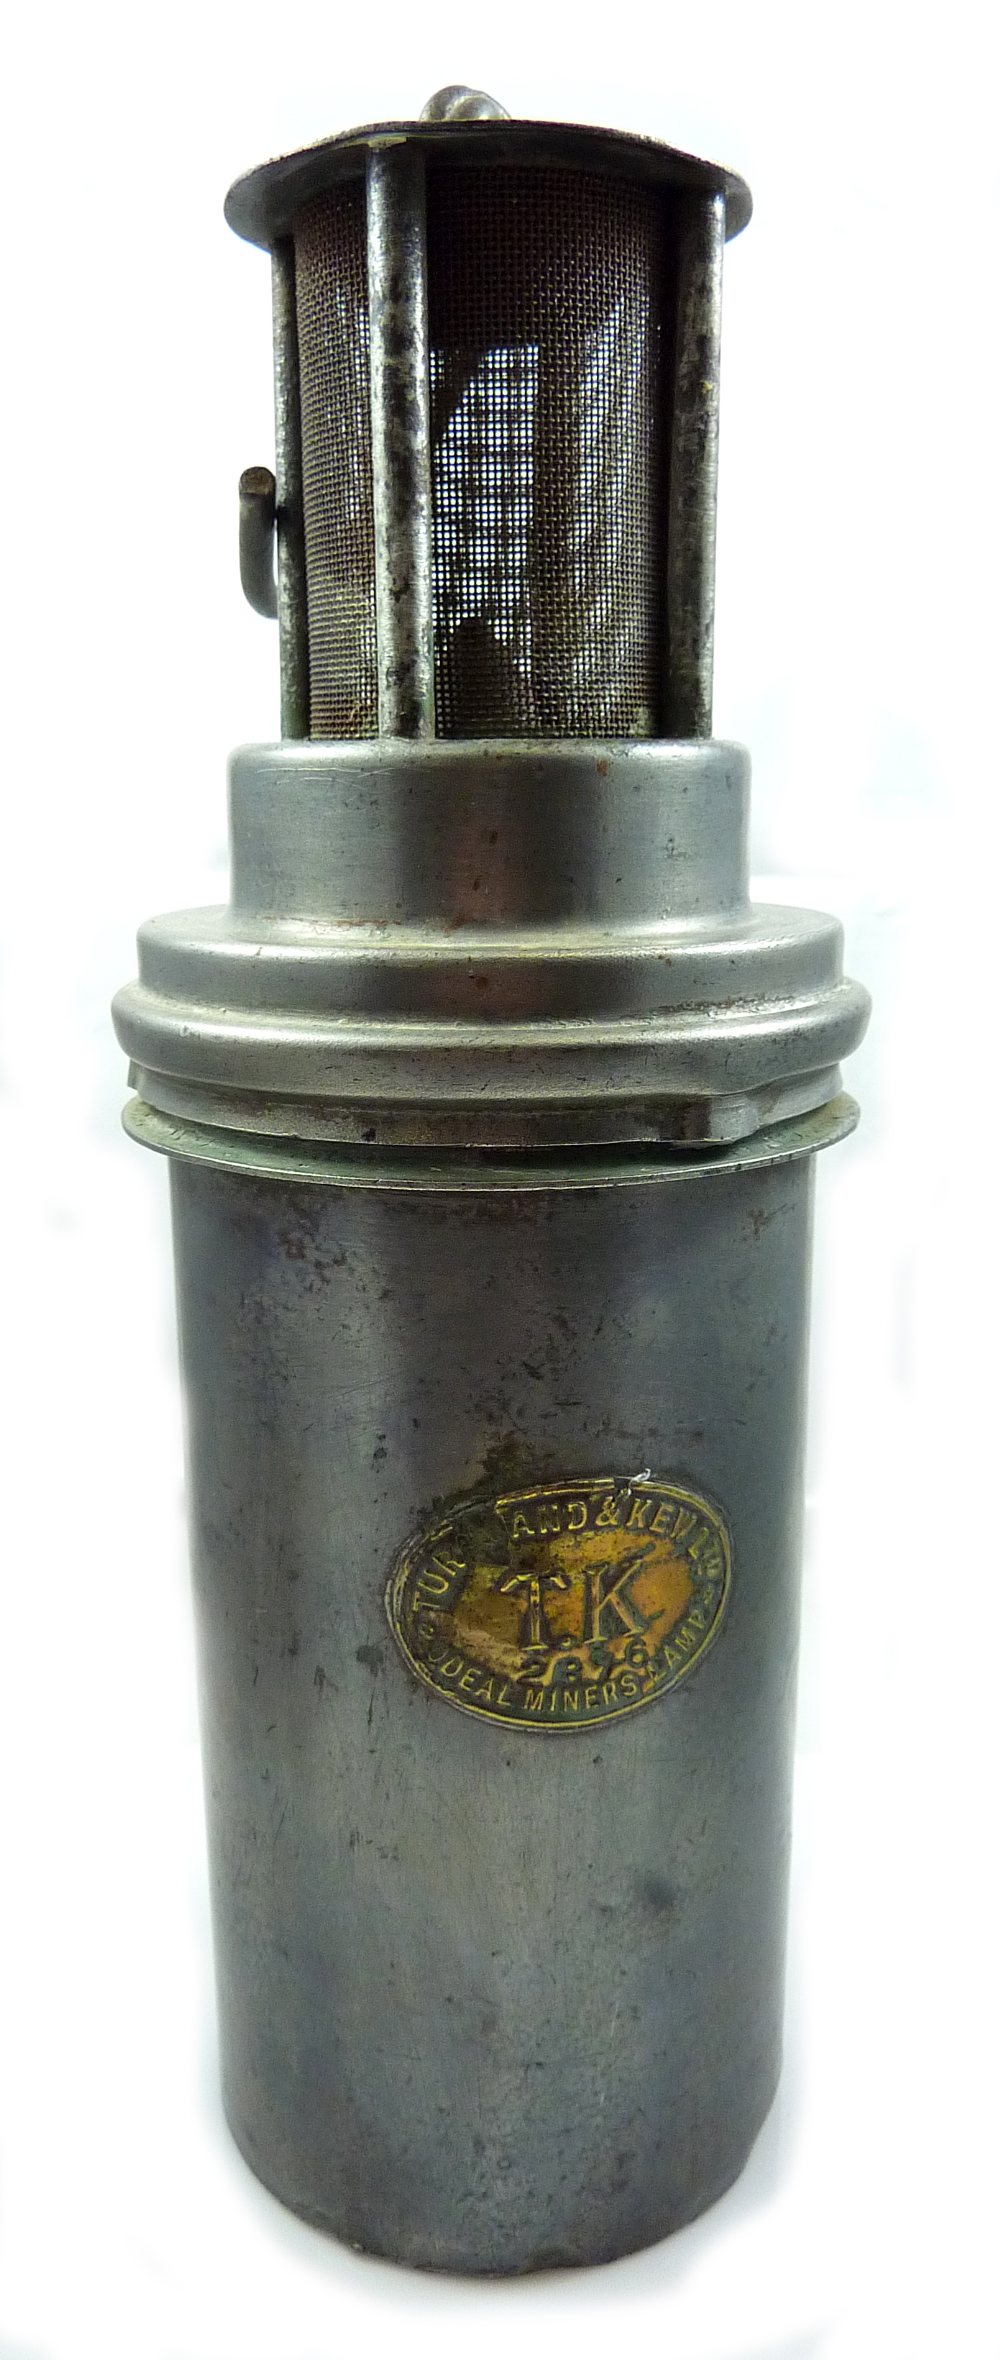 A Turquand & Kew Ltd flame safety lamp, height 27cm.